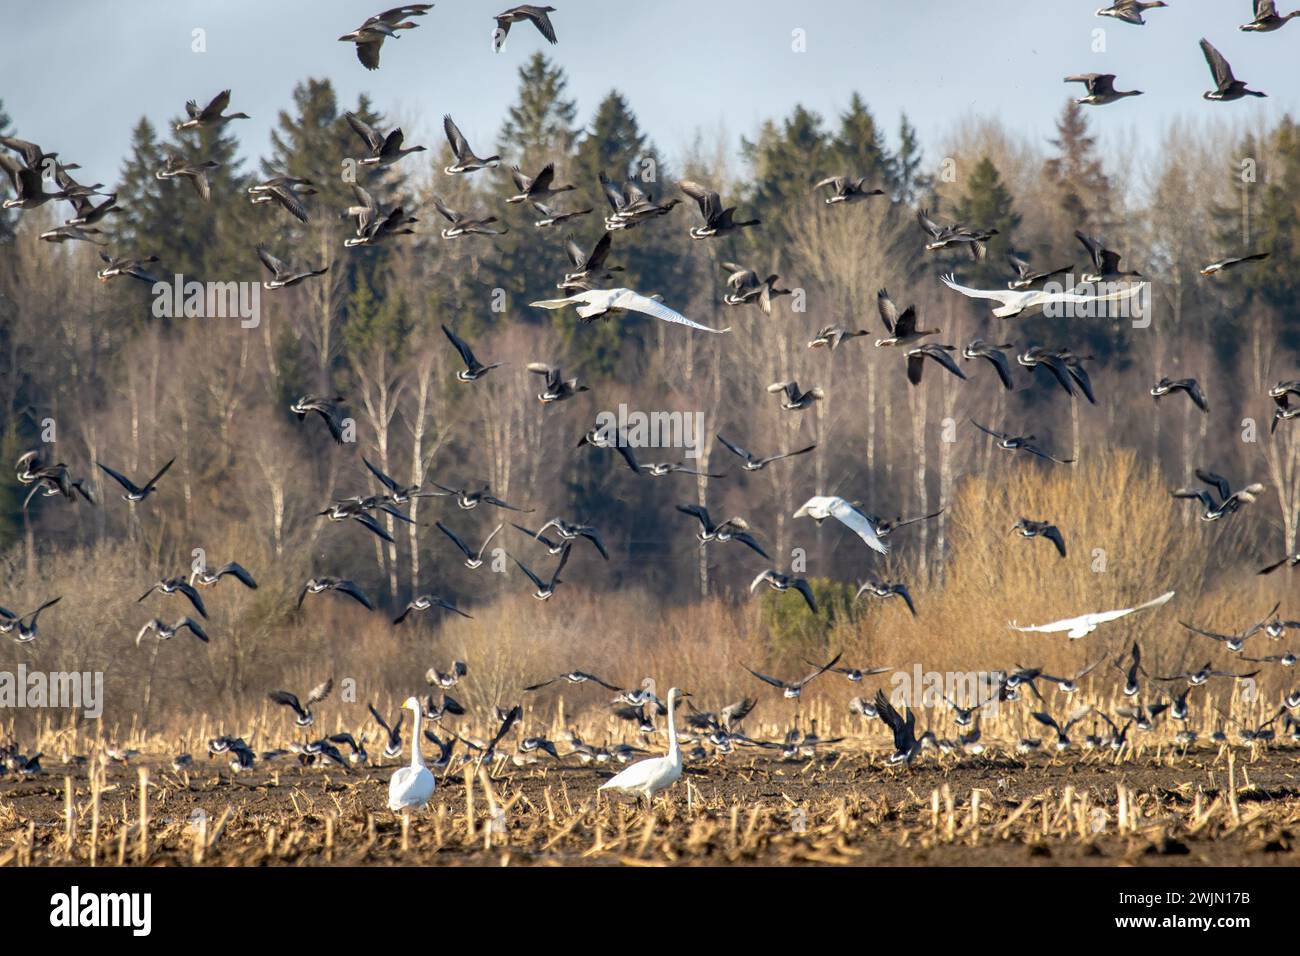 An example of mixed wintering of aquatic birds (Bean goose (Anser fabalis) and whooper swan (Cygnus cygnus) on agricultural land (cornfields) in North Stock Photo